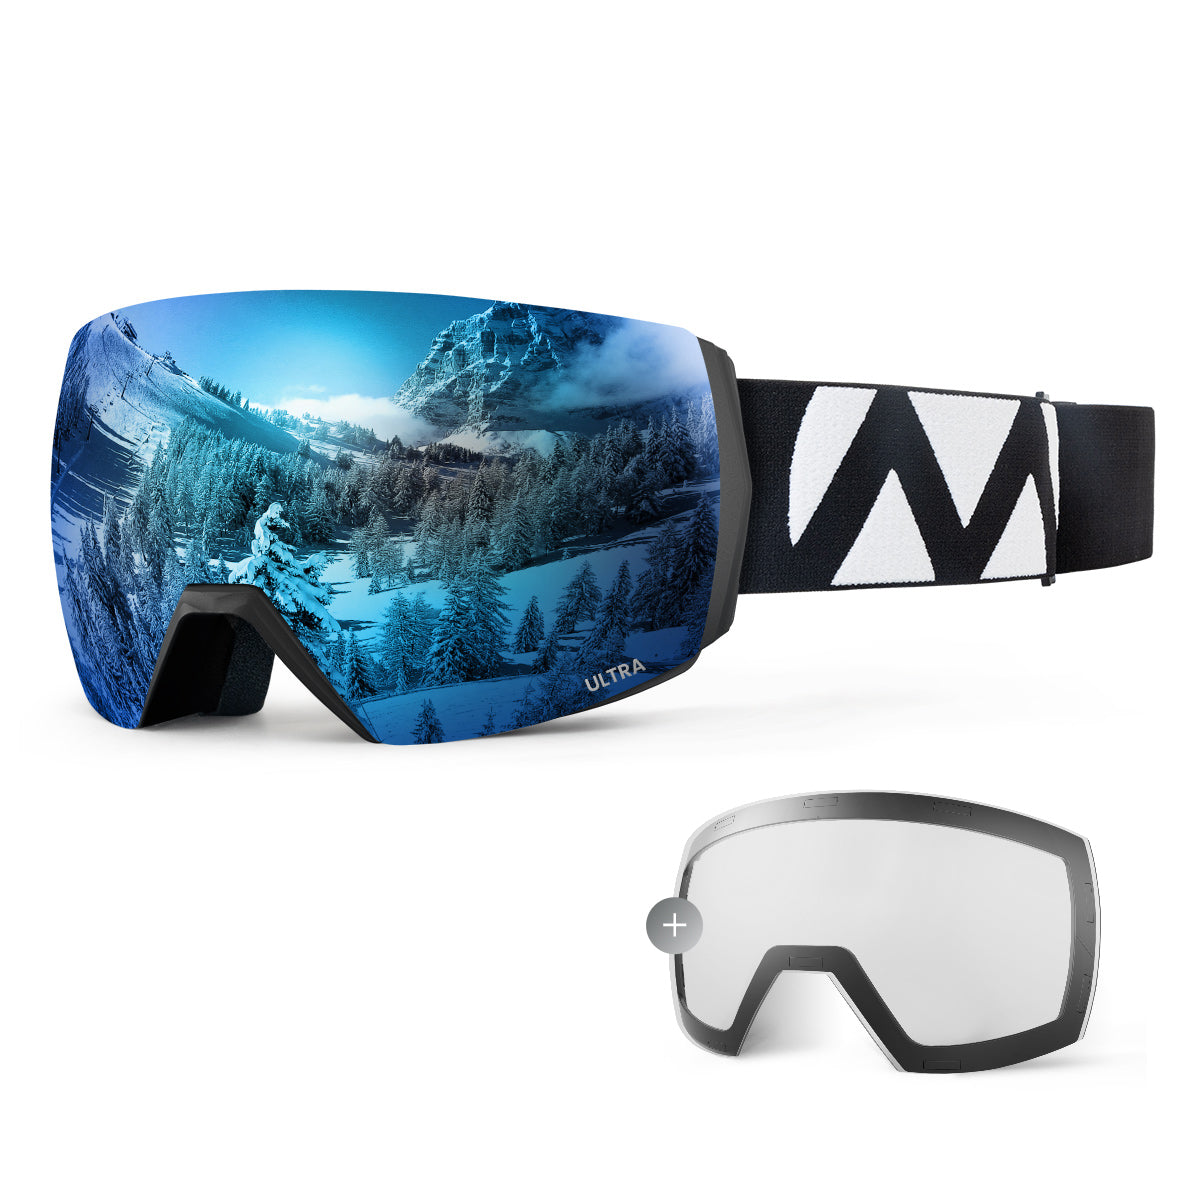 IMISSILLEB Ski Goggles Over Glasses, Anti-Fog Dustproof UV Protection  Polarized Snow Sunglasses for Men Women Outdoor Snowboard Motorcycle 